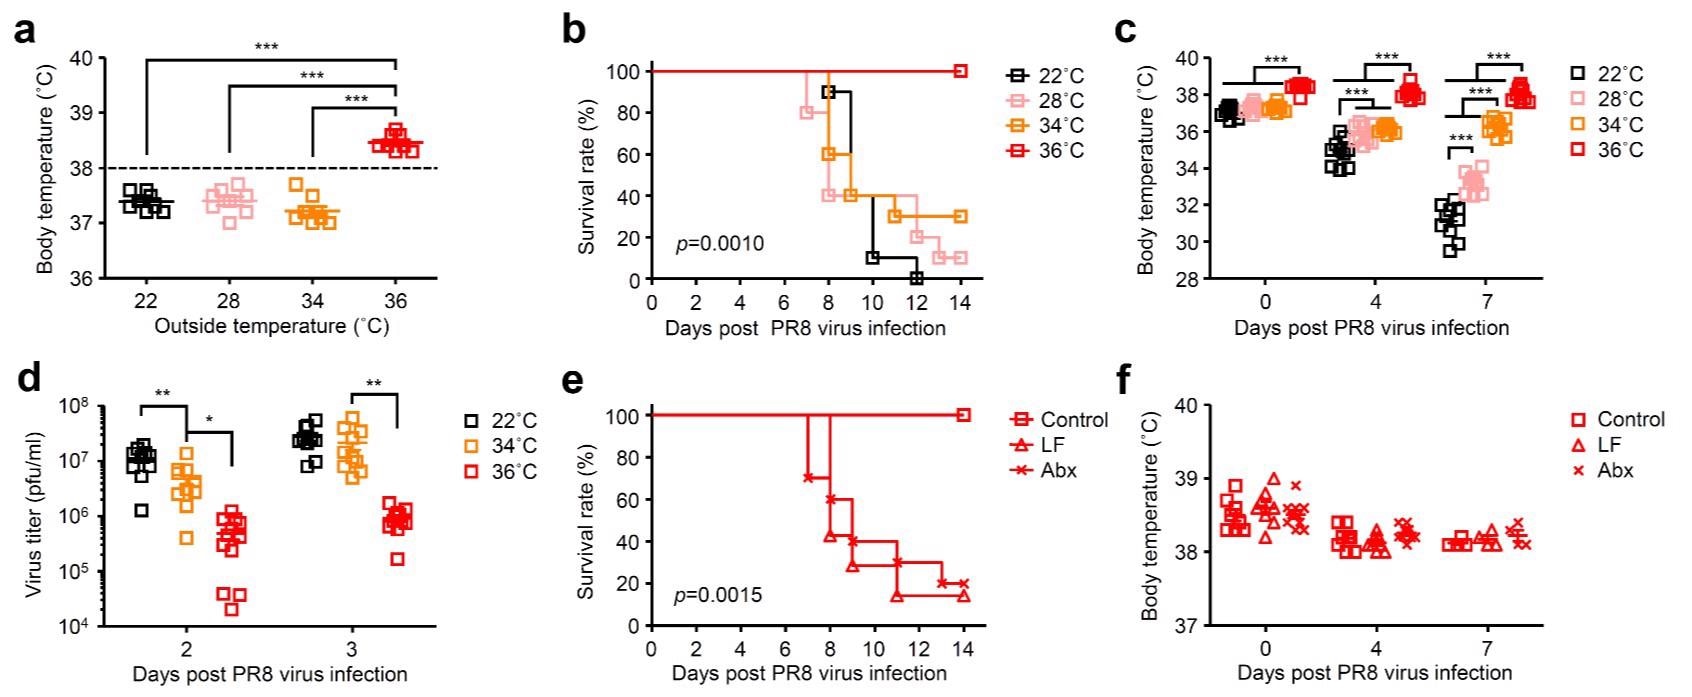 High body temperature increases gut microbiota-dependent host resistance to influenza virus infection. Mice were kept at 22, 28, 34, or 36 °C for 7 d before influenza virus infection and throughout infection. a, Body temperature of naïve mice kept at 22, 28, 34, or 36 °C were measured. b-d, Mice kept at 22, 28, 34, or 36 °C were infected intranasally with 1,000 pfu of influenza virus. Mortality (b), core body temperatures (c), and virus titer in the lung wash (d) were measured on indicated days after challenge. e, f, LF-fed, Abx-treated, and control mice kept at 36 °C were infected intranasally with 1,000 pfu of influenza virus. Mortality (e) and core body temperatures (f) were measured on indicated days after challenge.